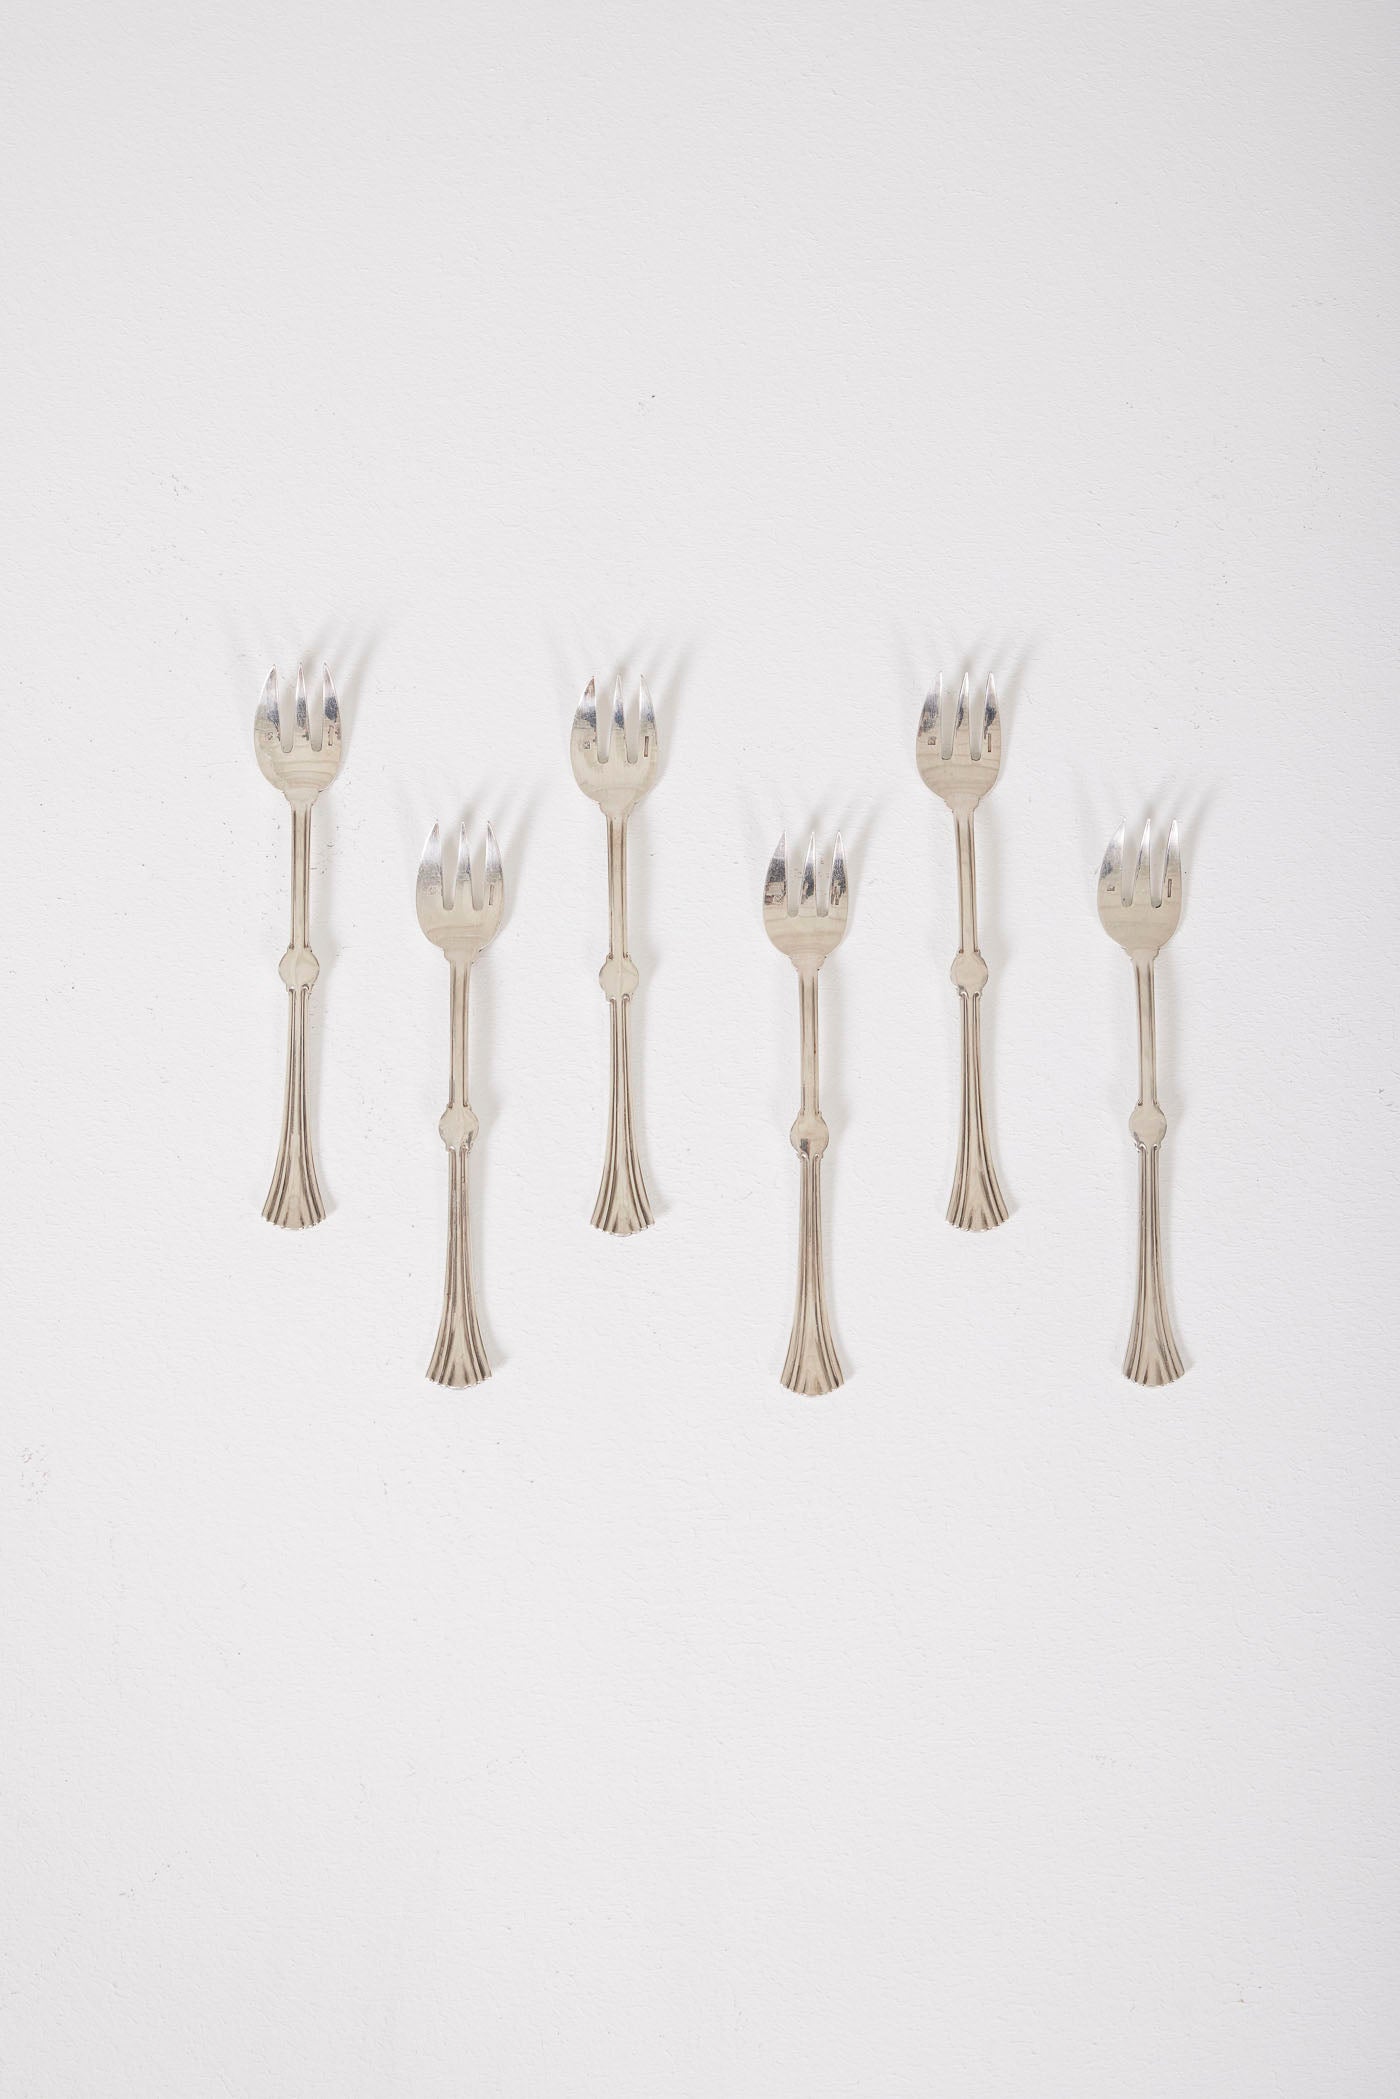 Set of 6 Christofle silver-plated oyster forks. Very nice condition.
LP2134